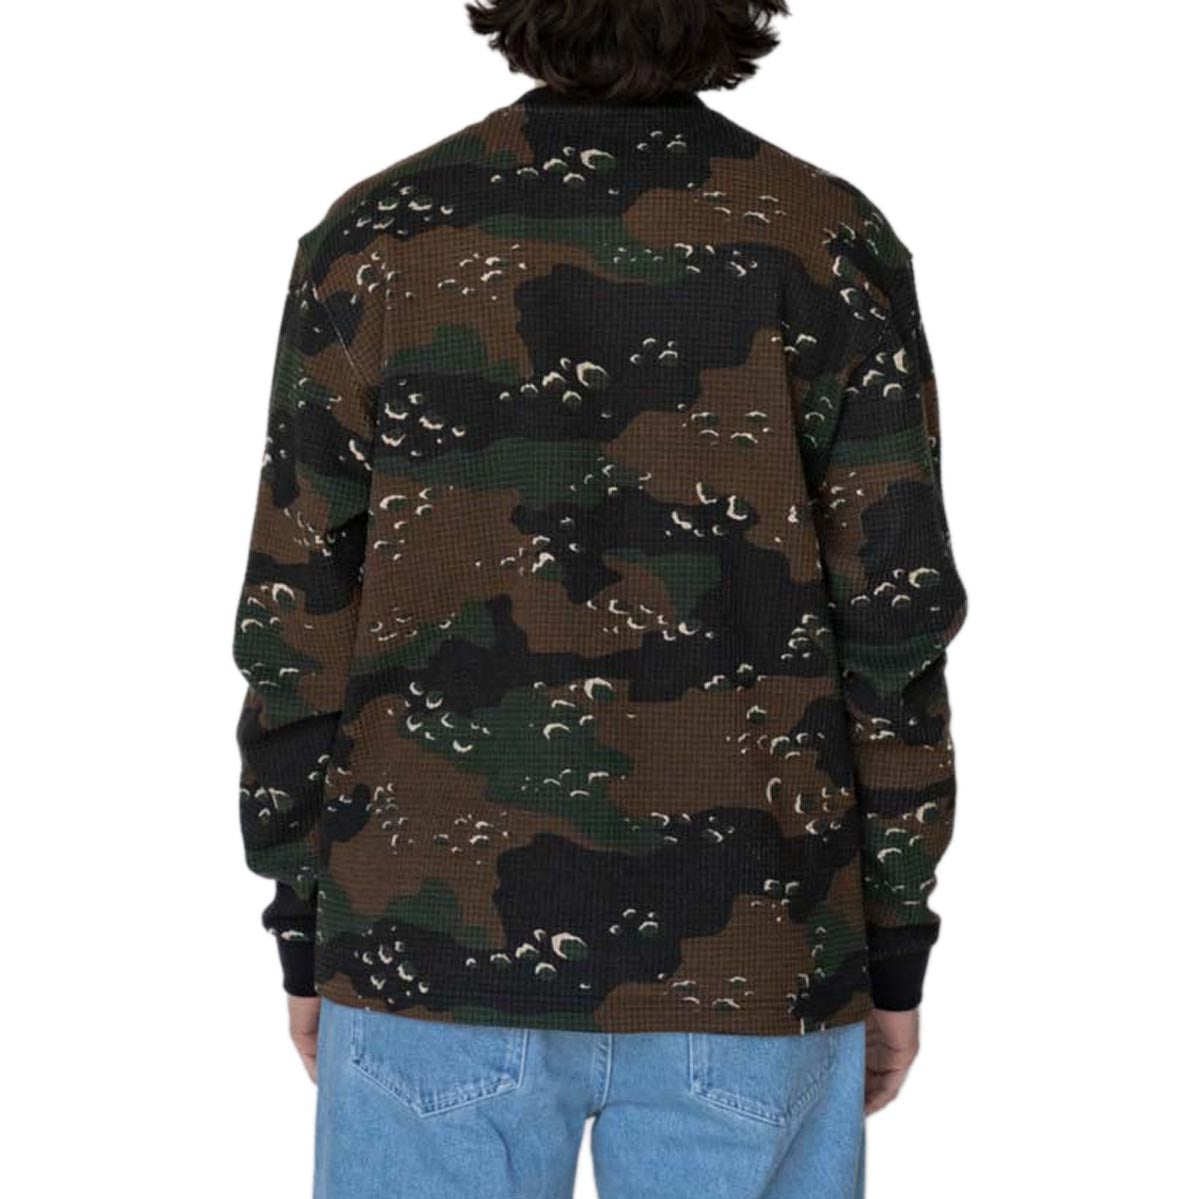 Welcome Covert Camo Thermal Shirt - Timber image 4